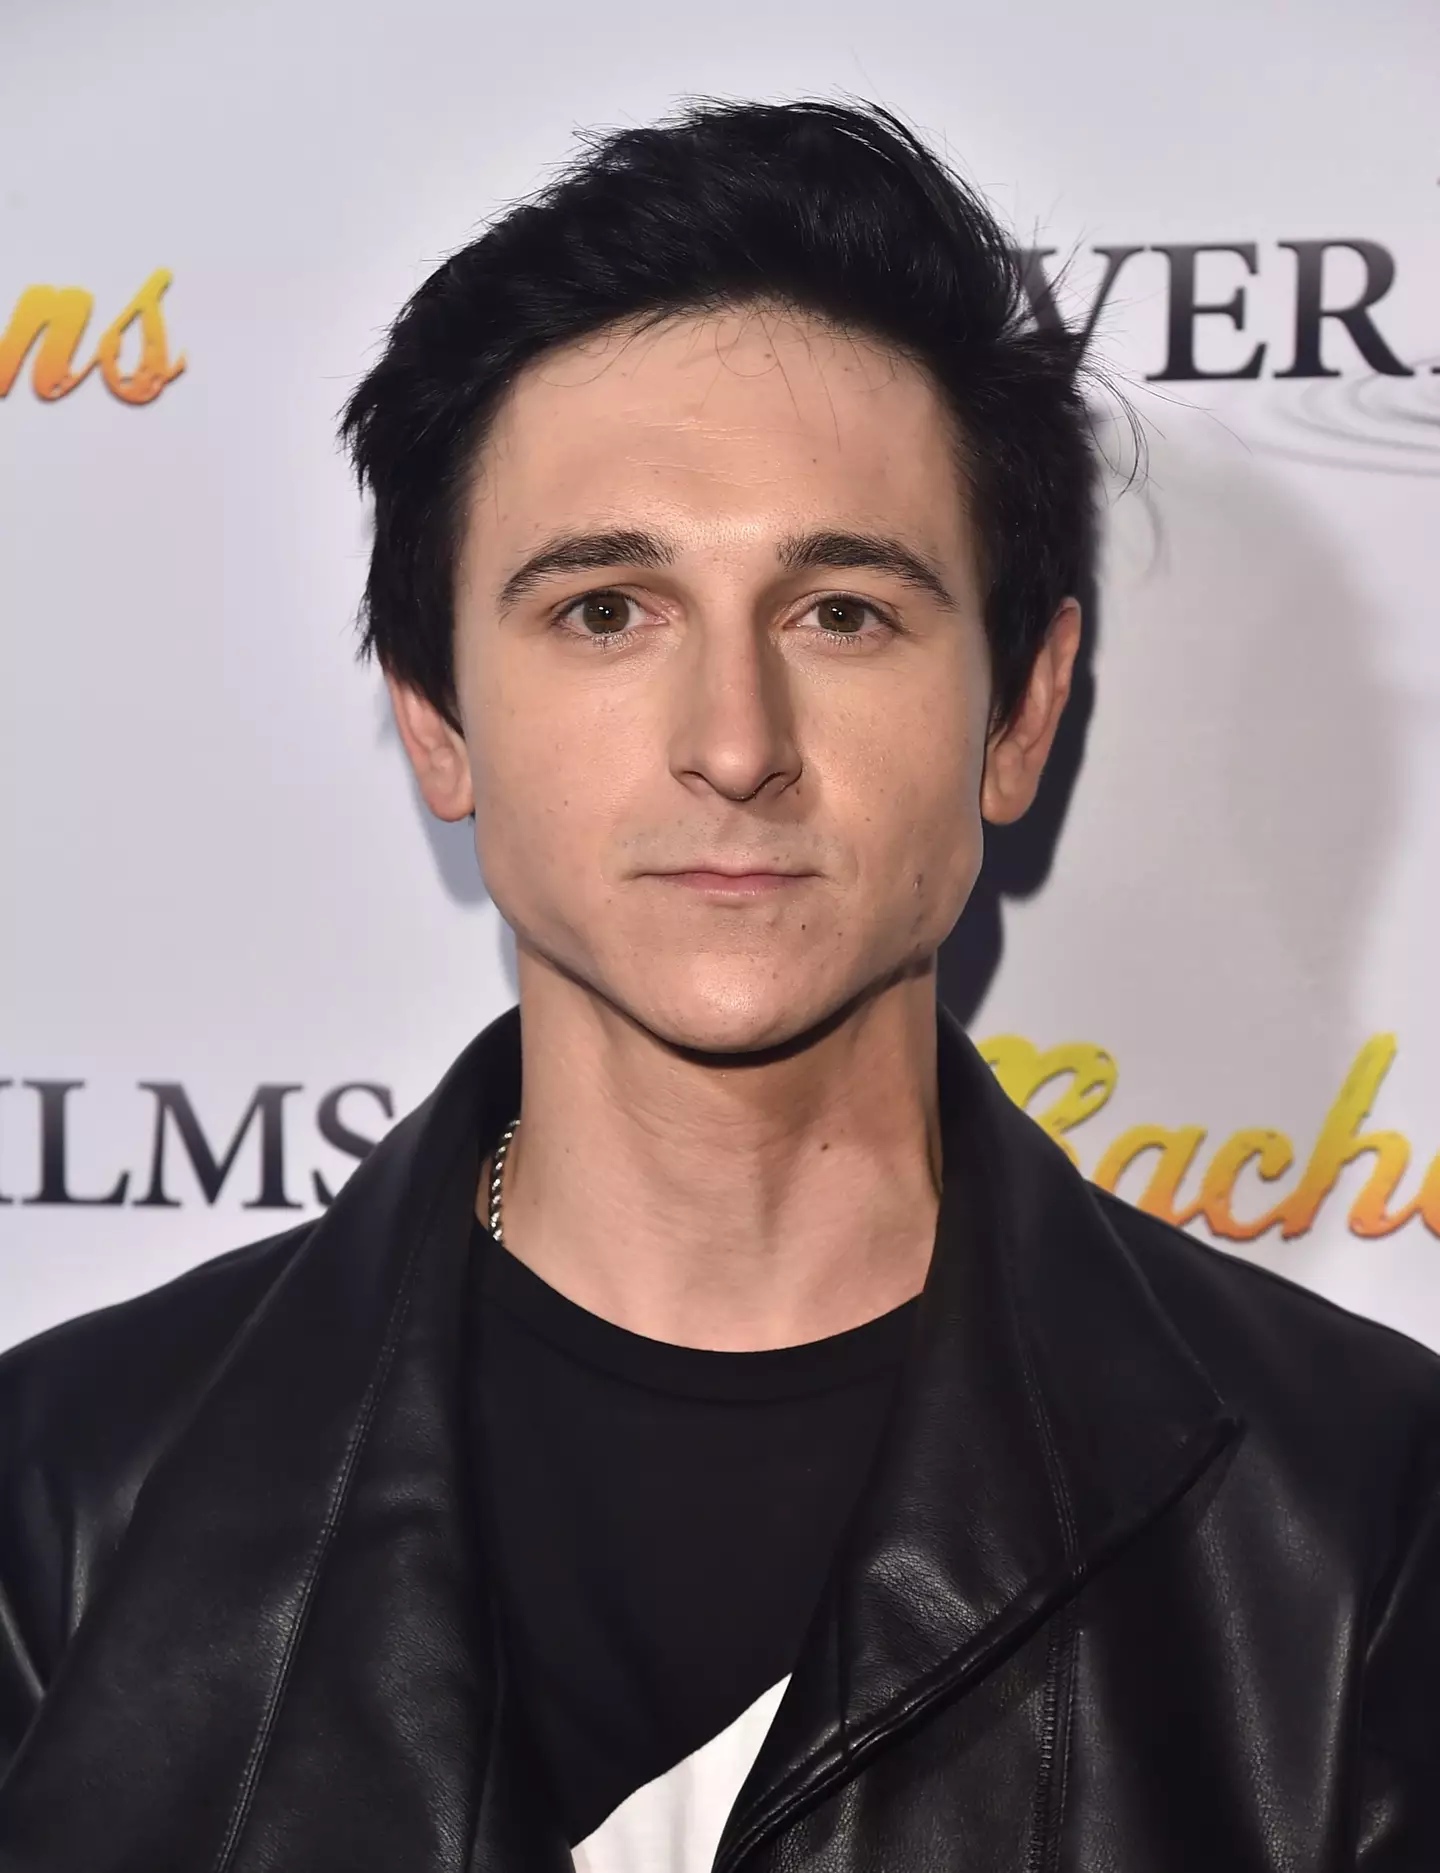 Mitchel Musso starred in a number of Disney Channel projects over his career.